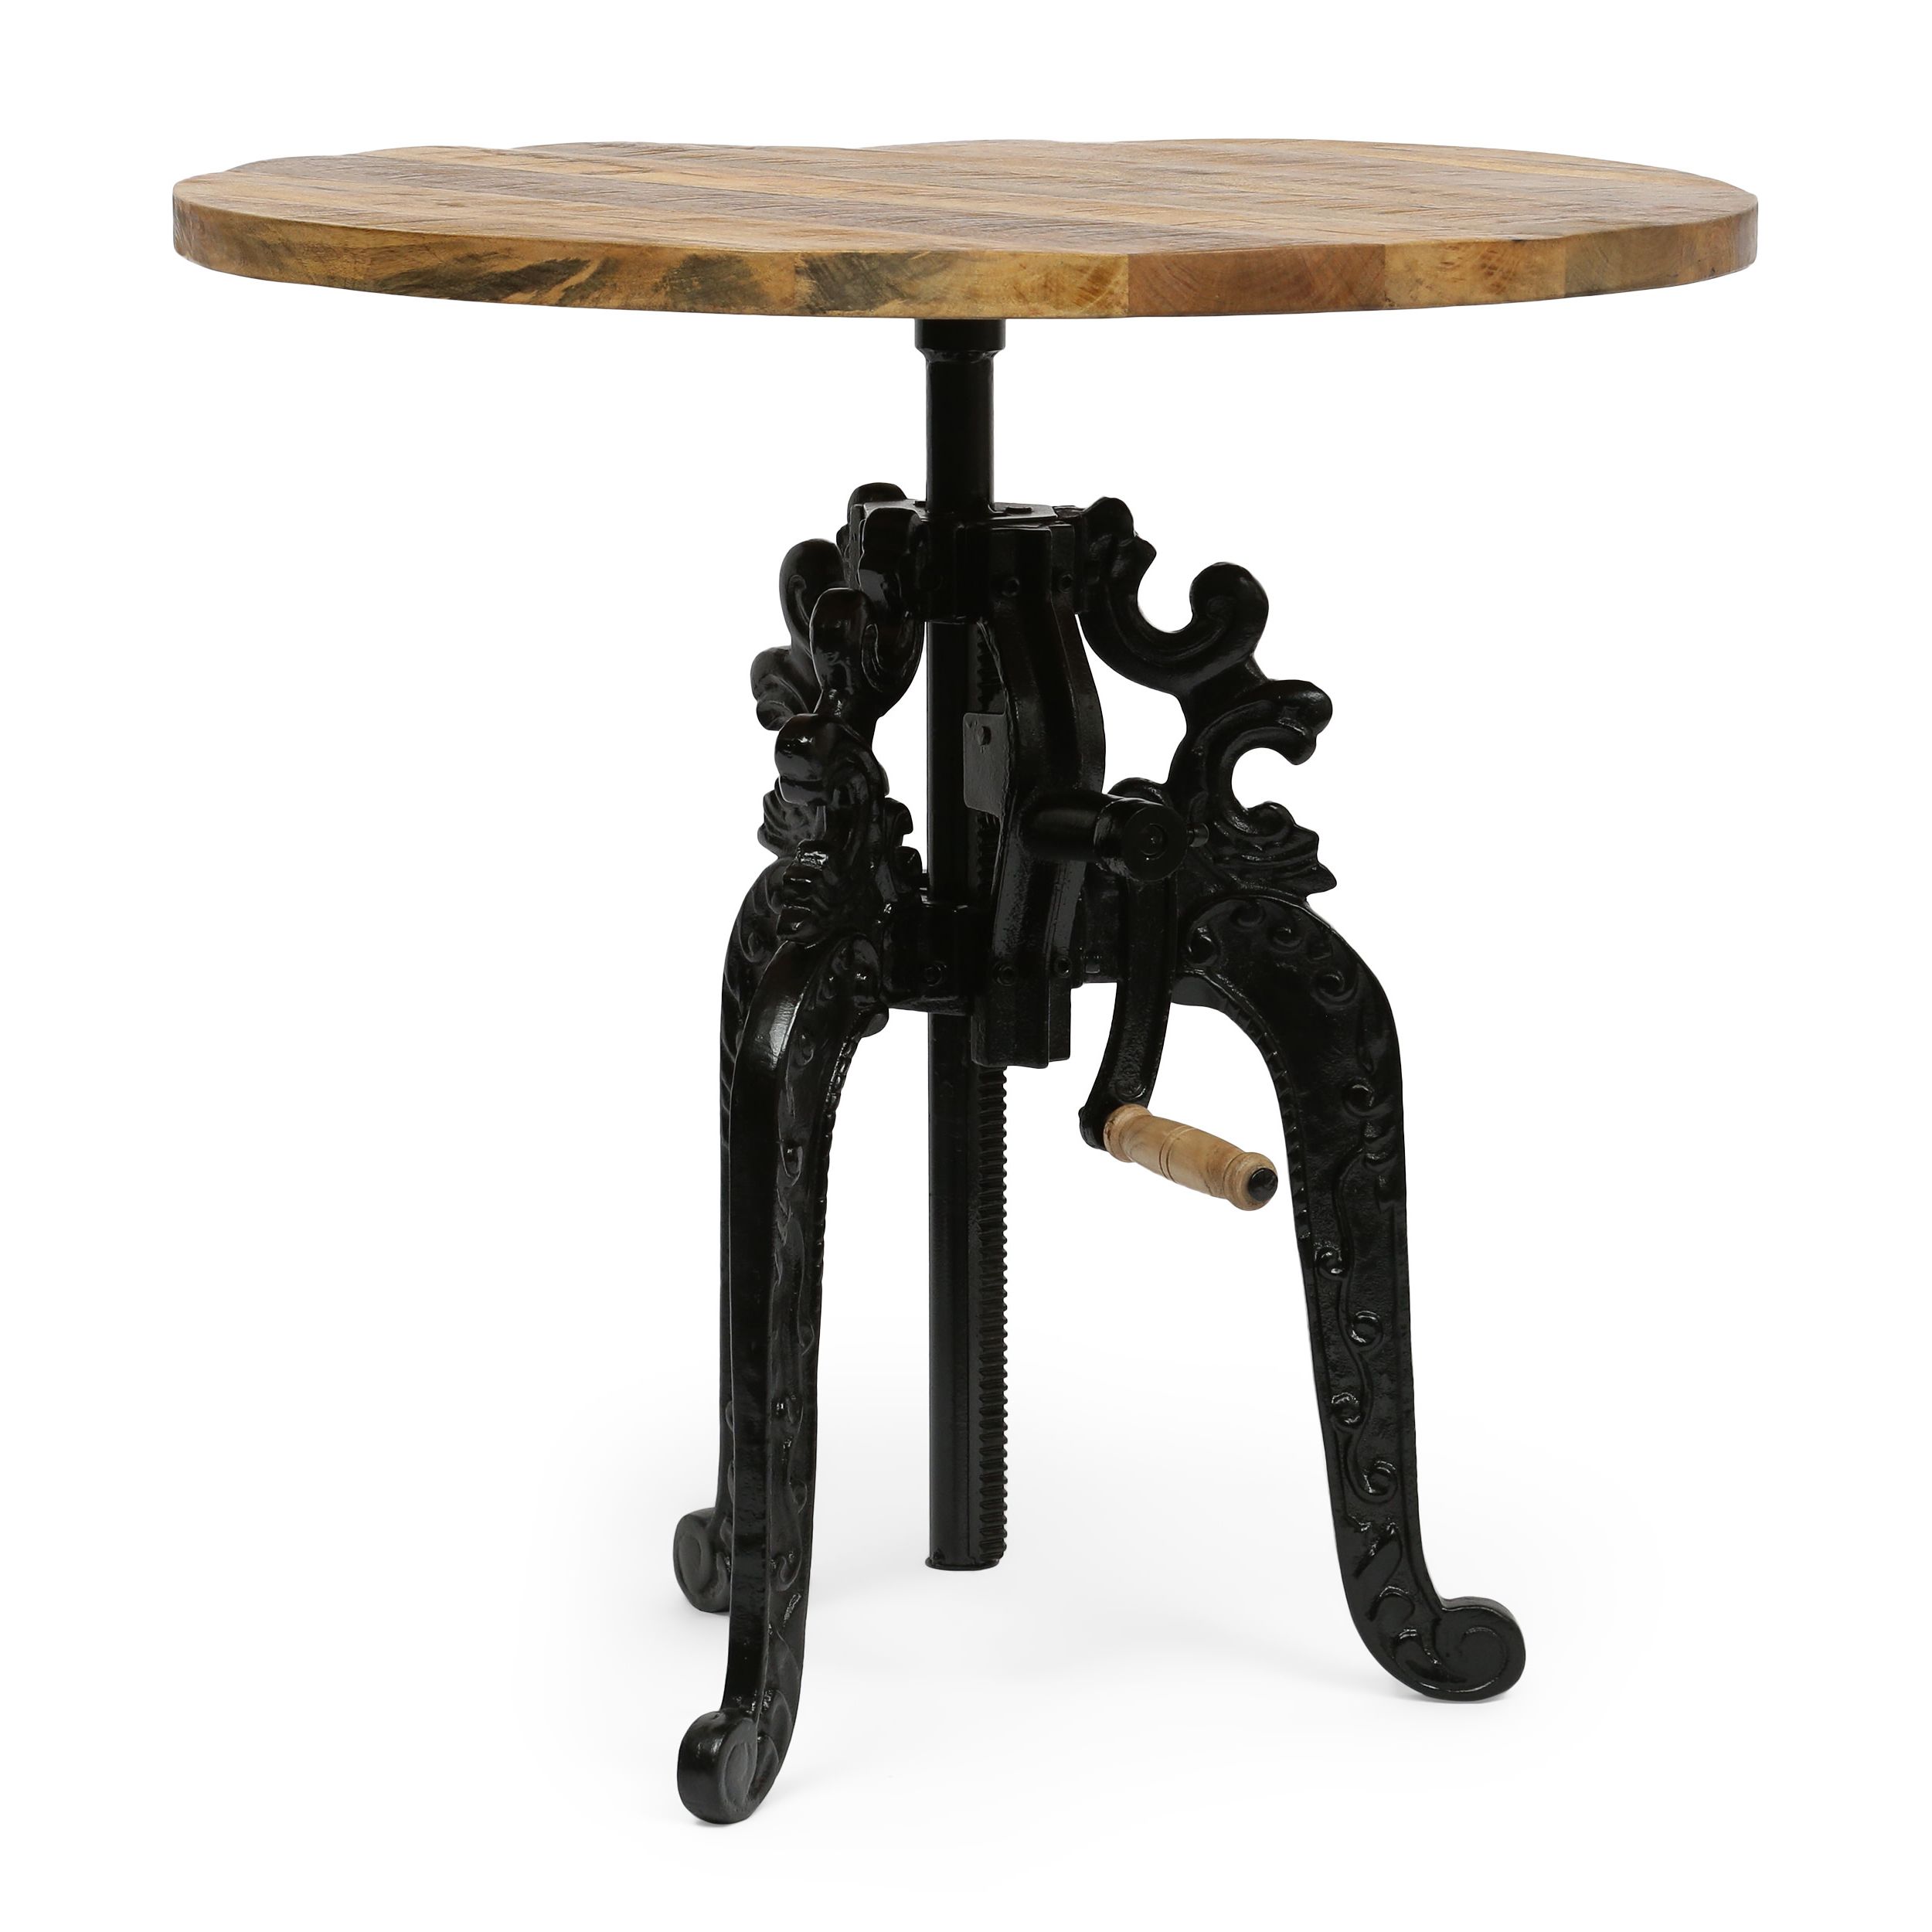 Current Gdf Studio Regina Outdoor Handmade Mango Wood Adjustable Bistro Table,  Natural And Black – Walmart Pertaining To Mango Wood Outdoor Tables (View 13 of 15)